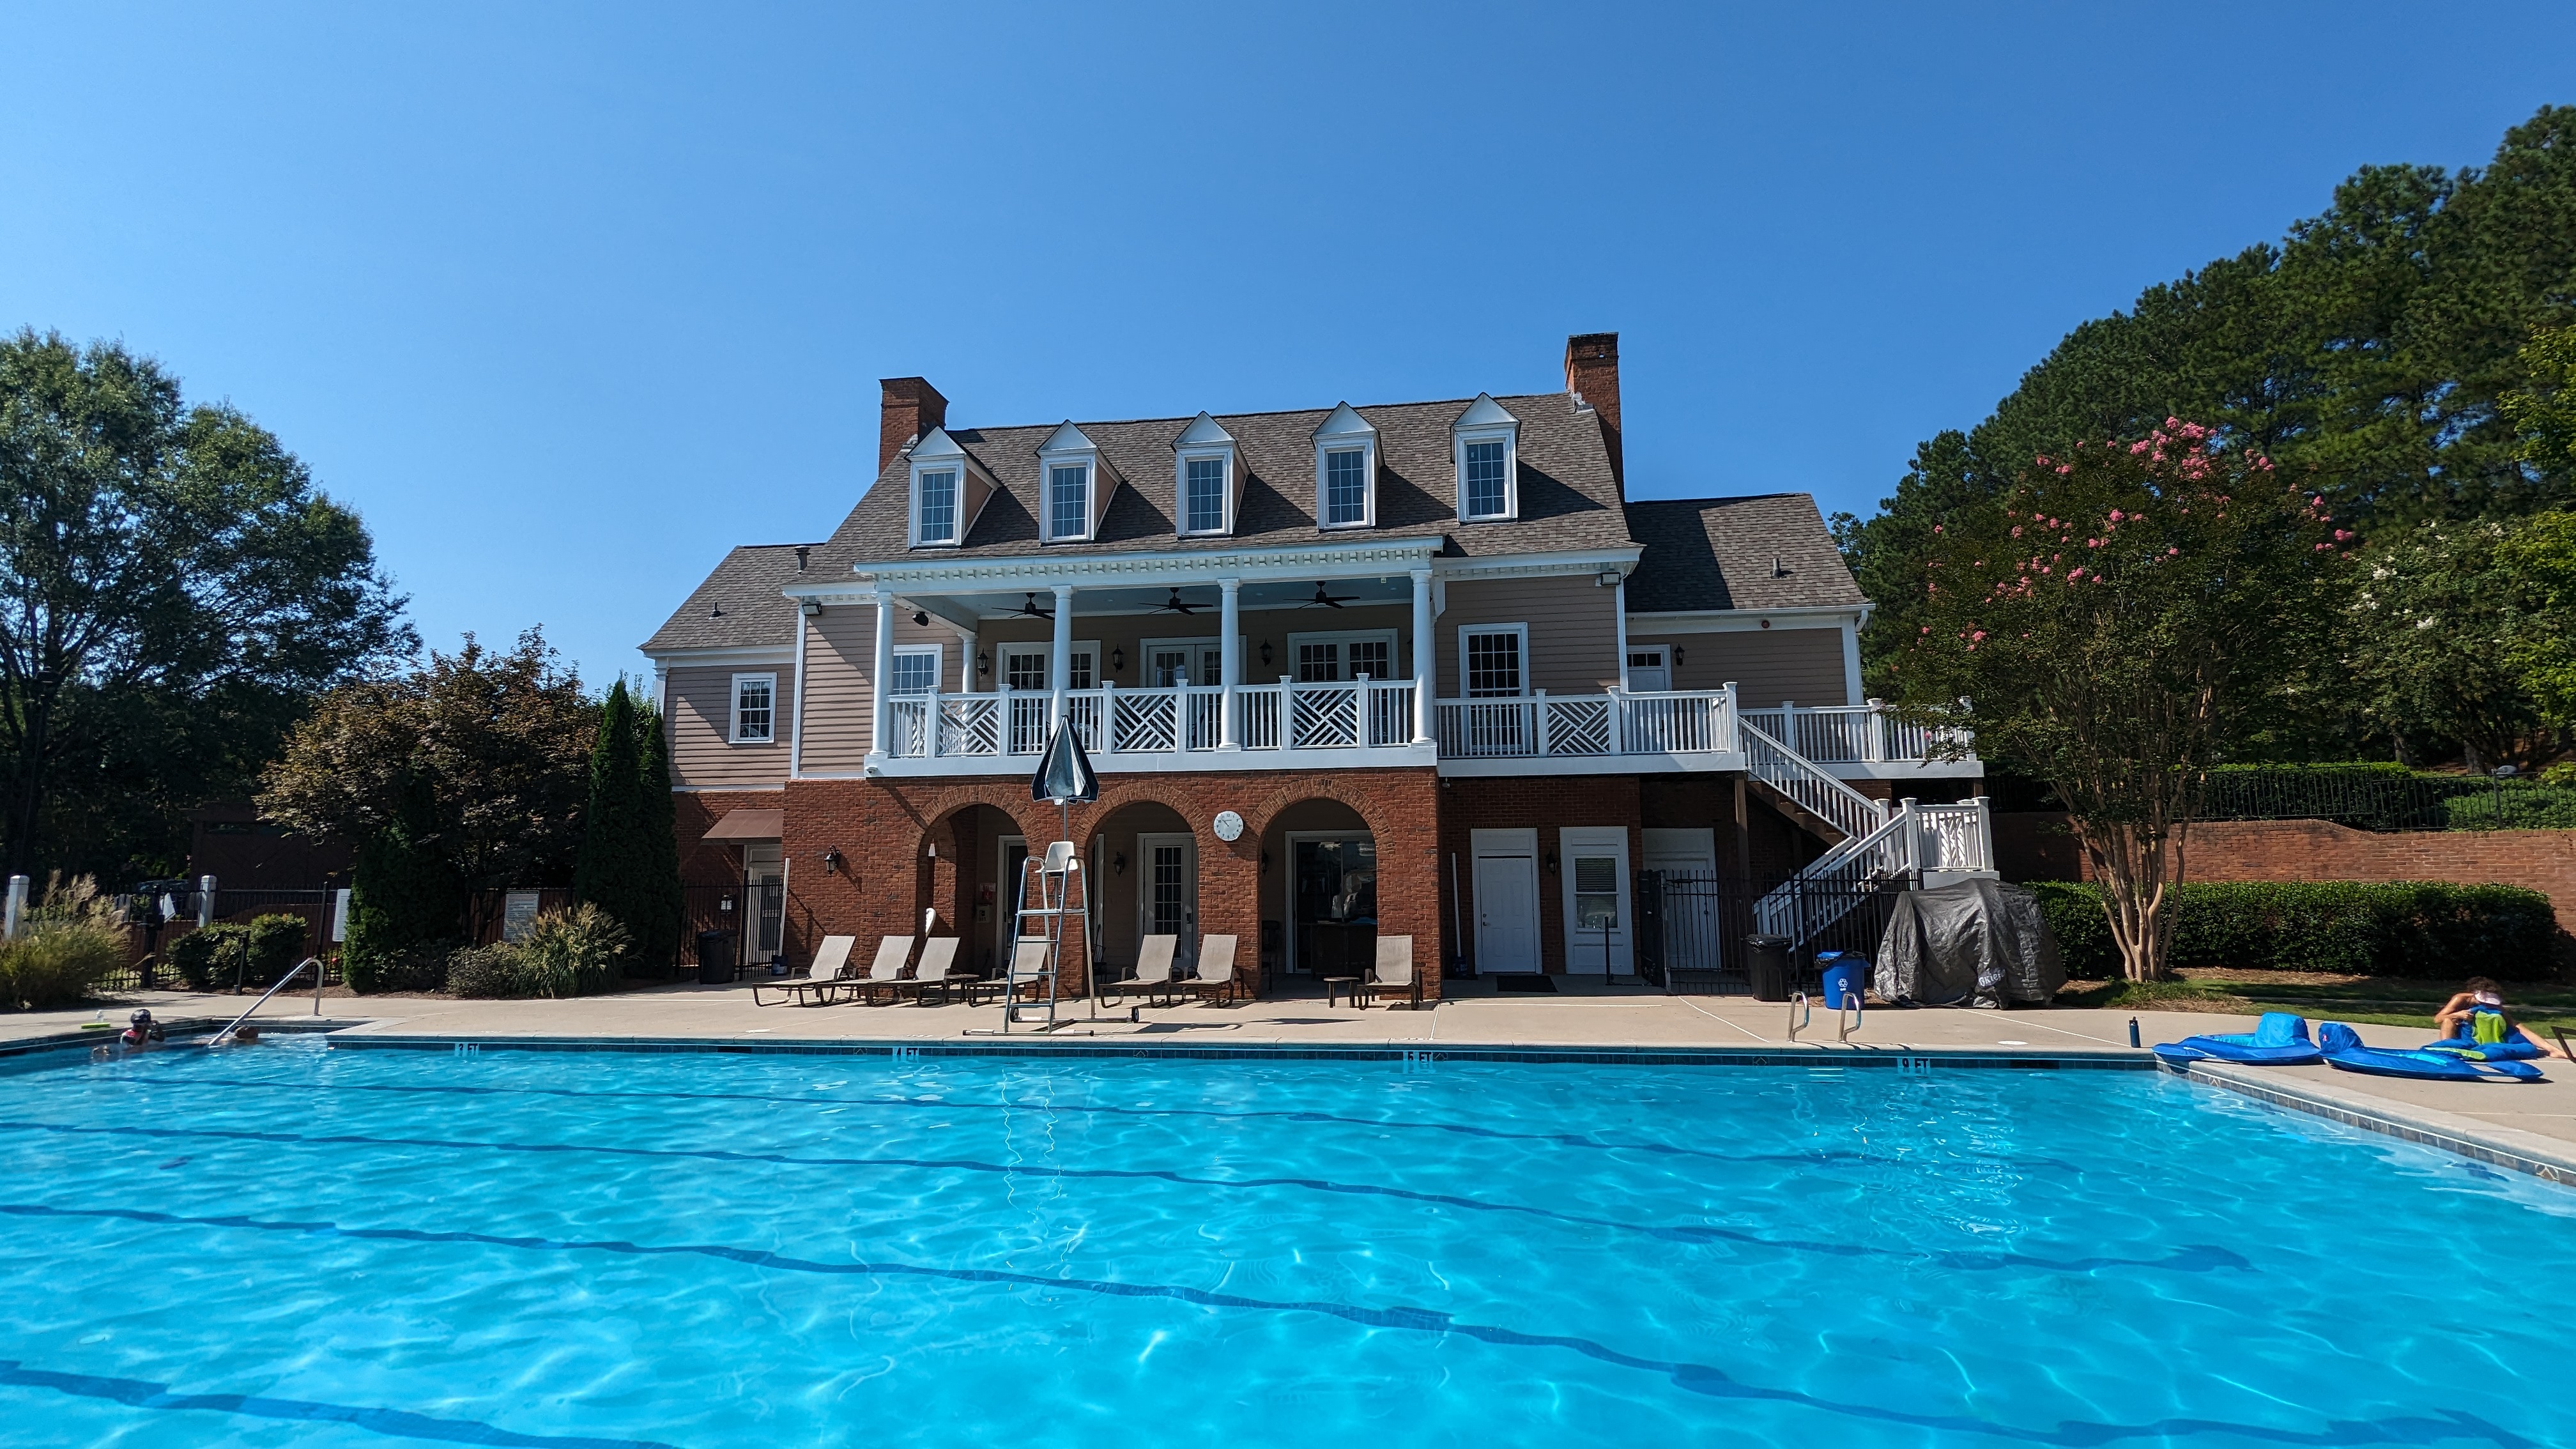 View of the Crescent Ridge Clubhouse from the pool deck.